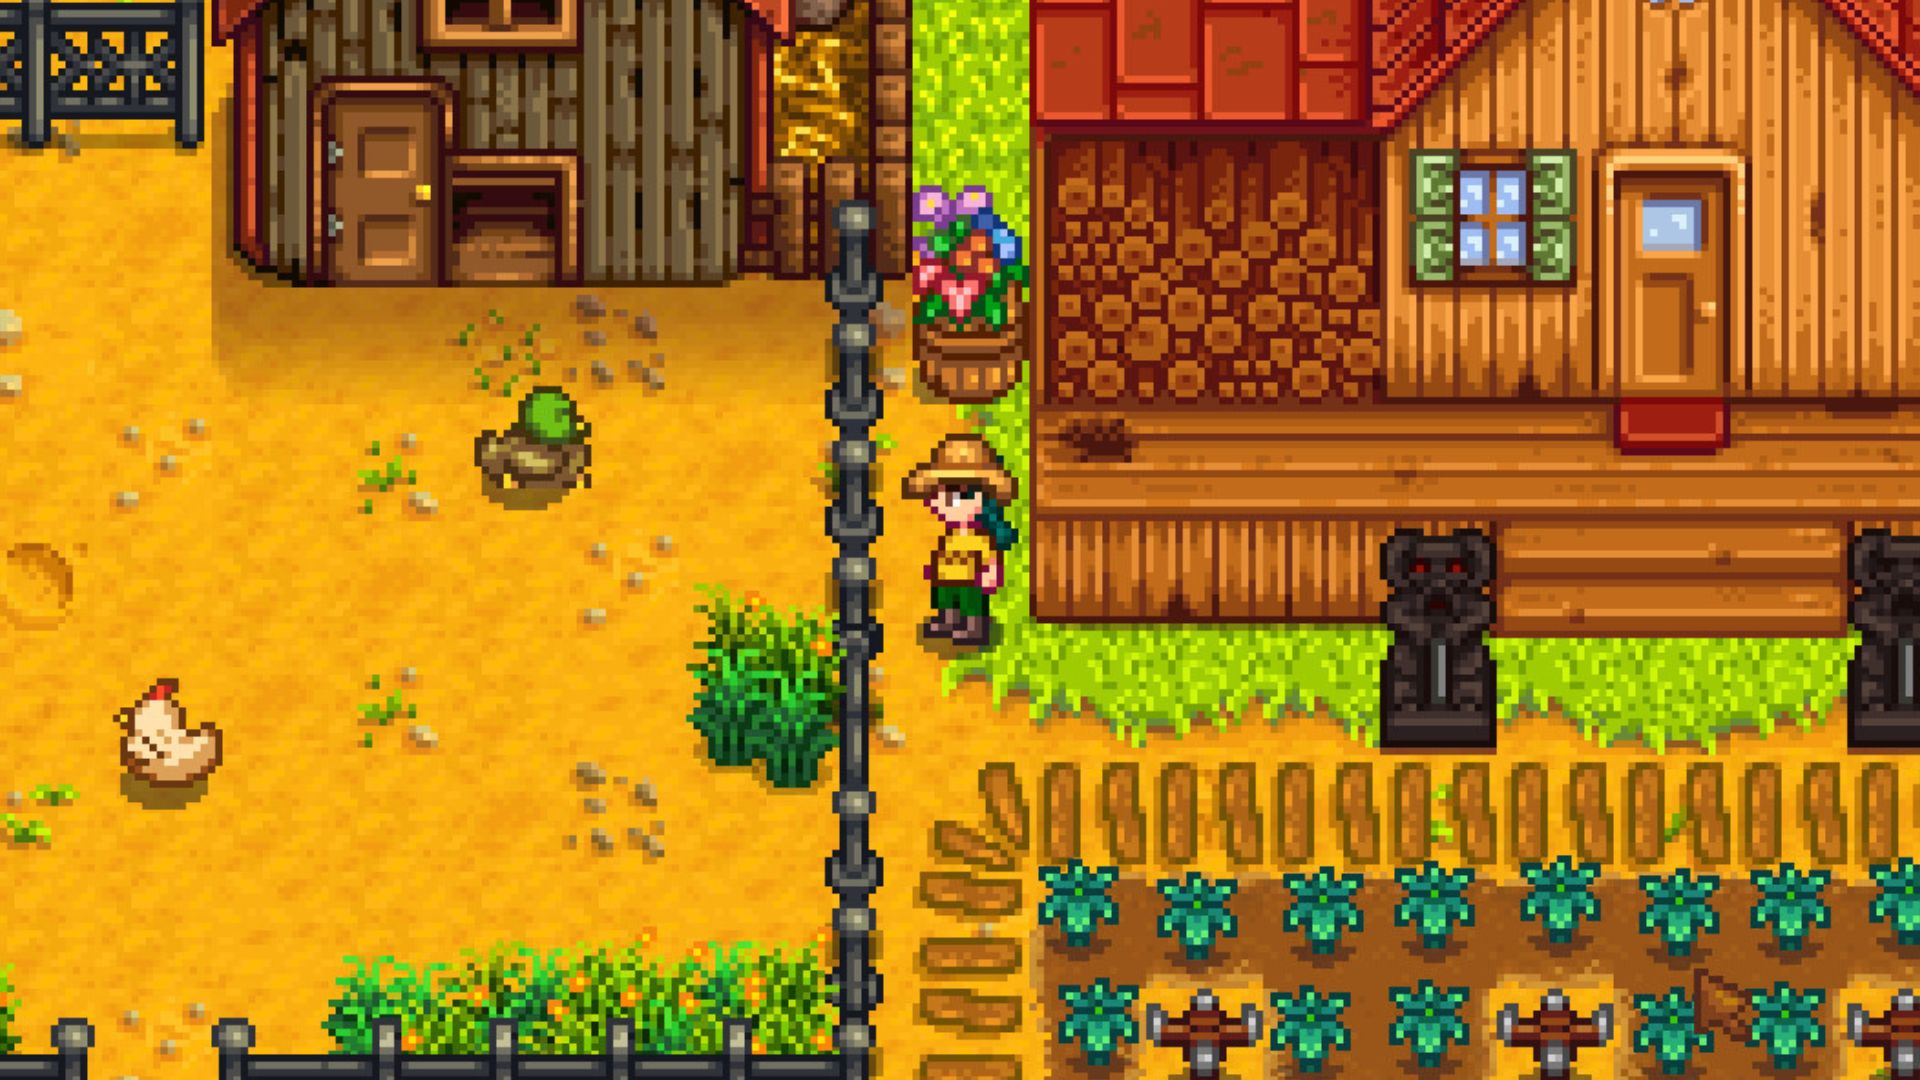 If you missed the Stardew Valley Steam sale, we’ve got a deal for you